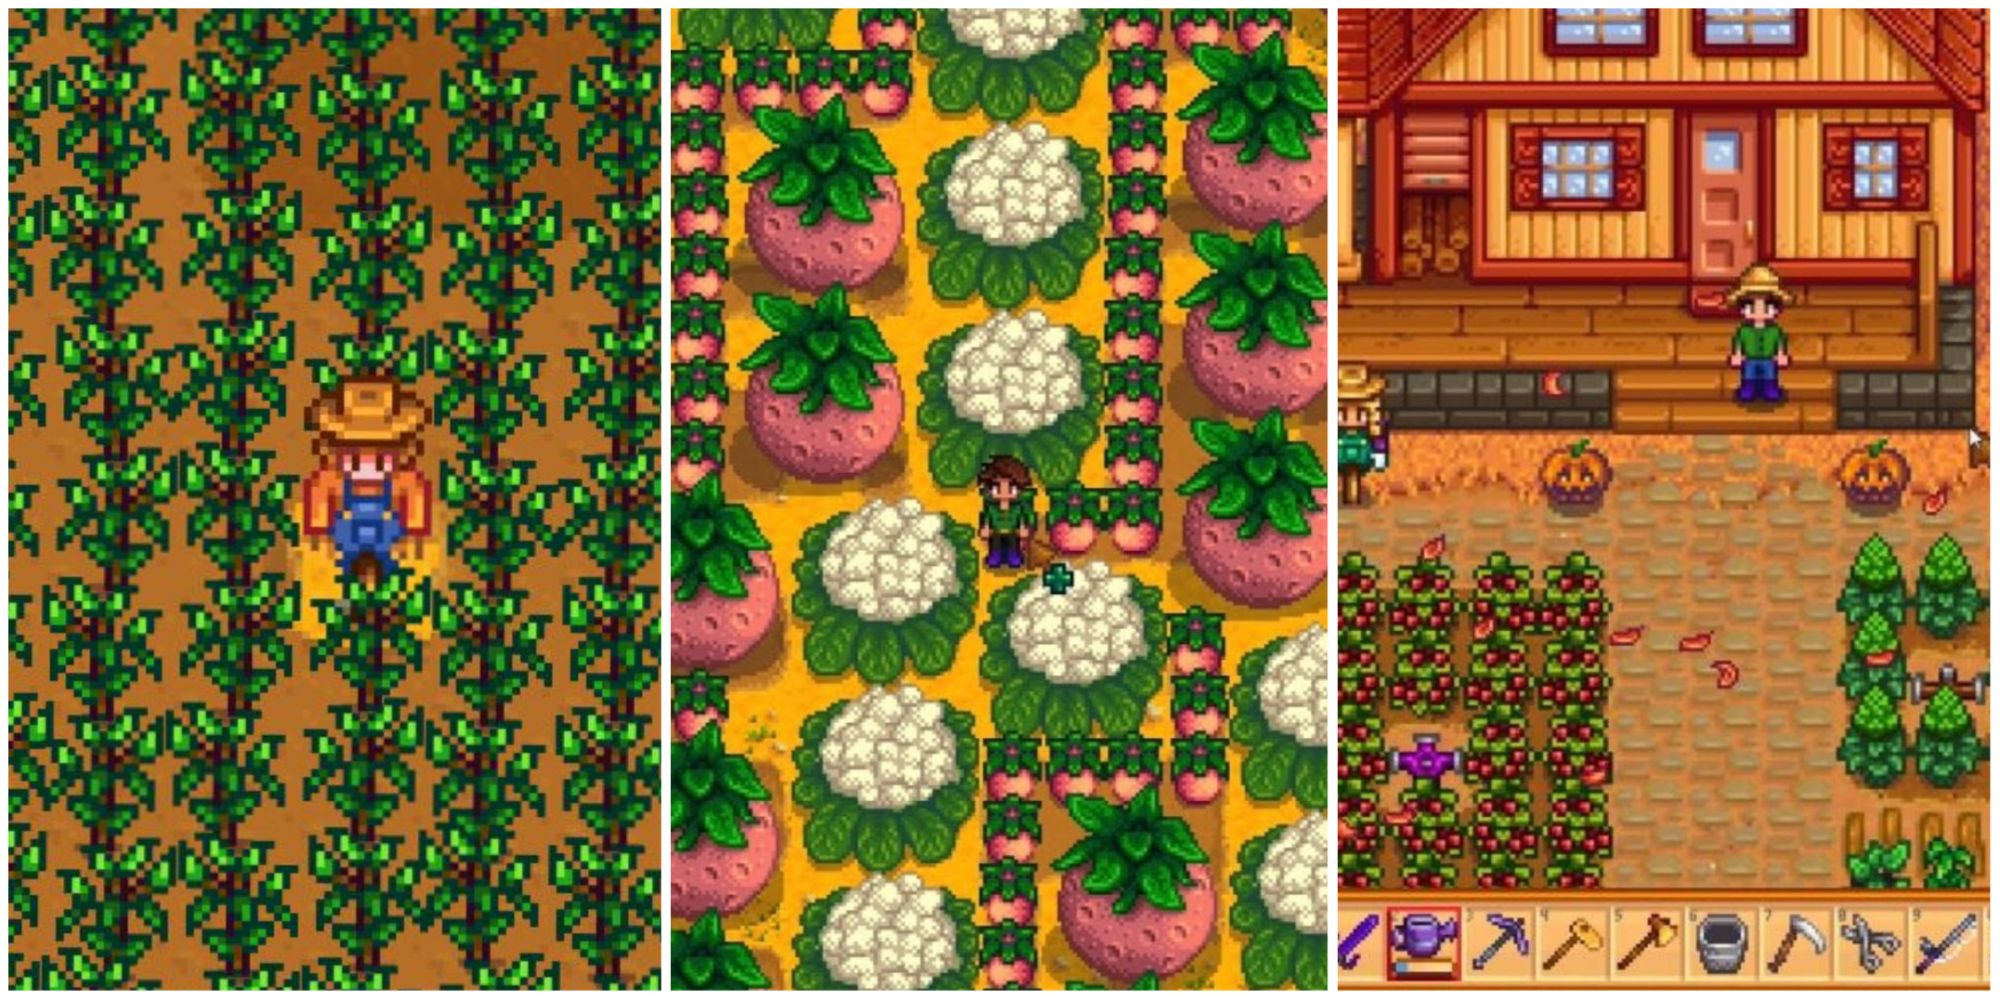 Stardew Valley split image featuring melons, cauliflowers, cranberries and more